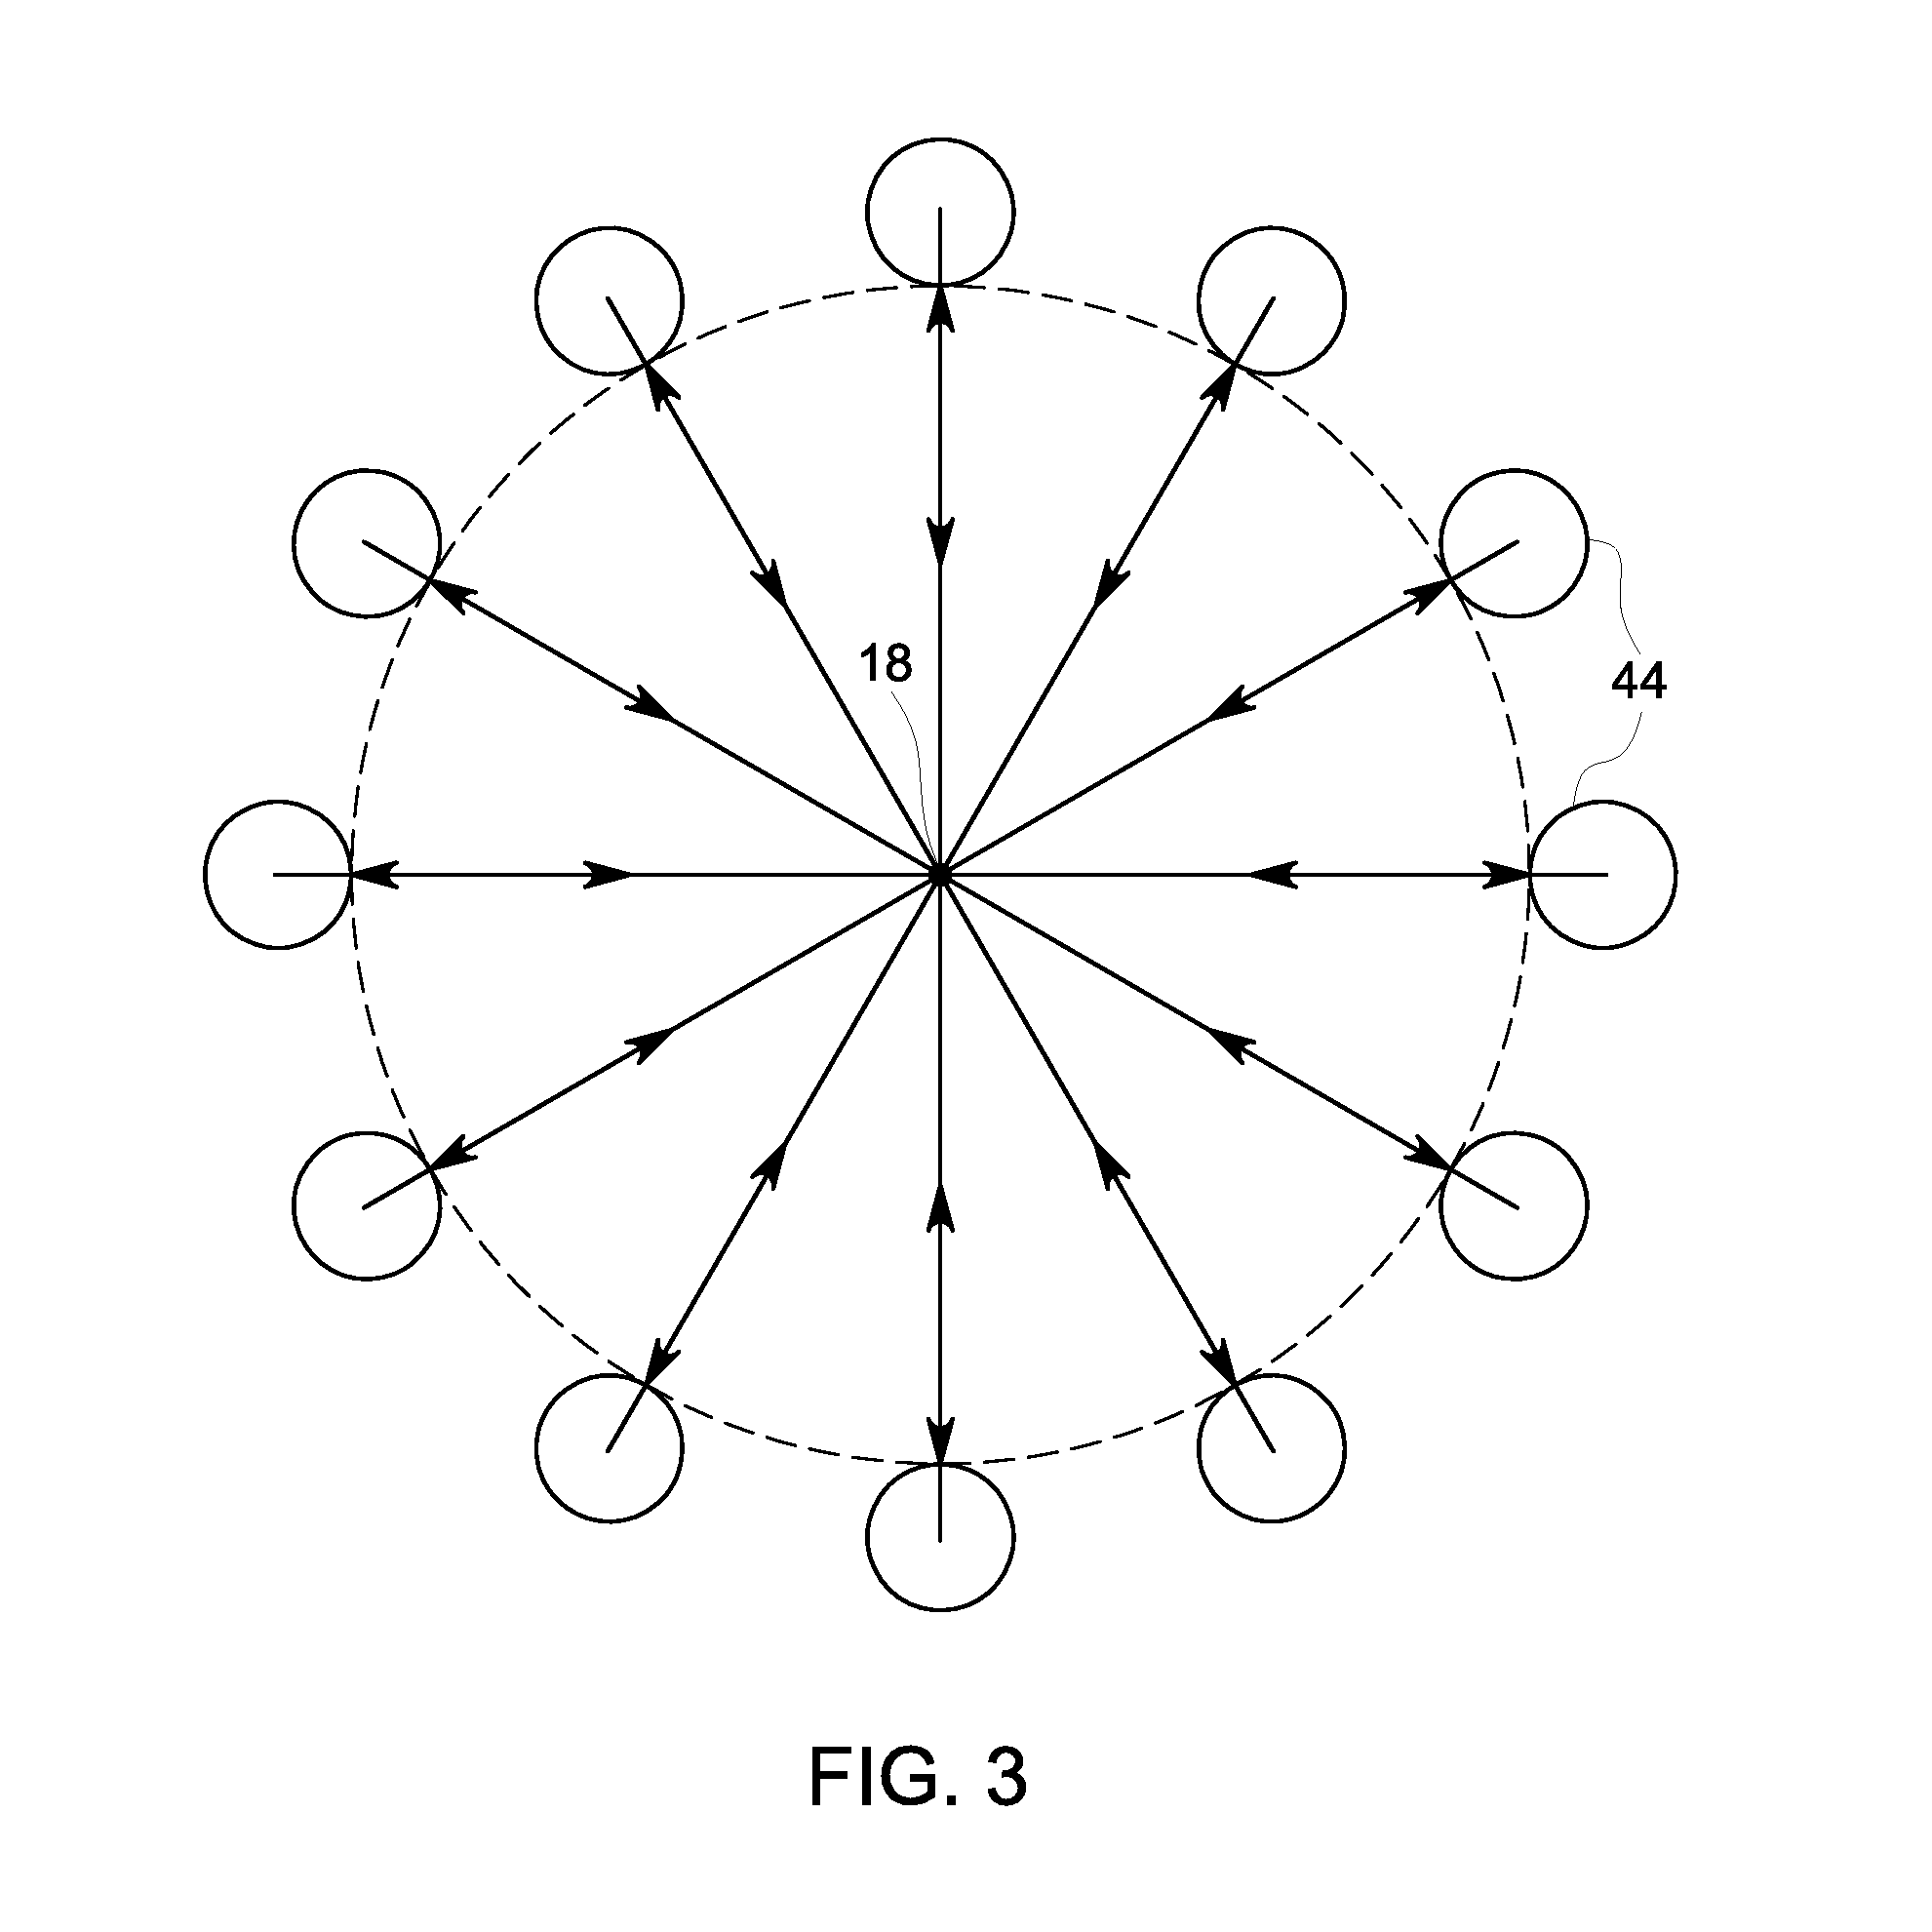 System and method for medical imaging